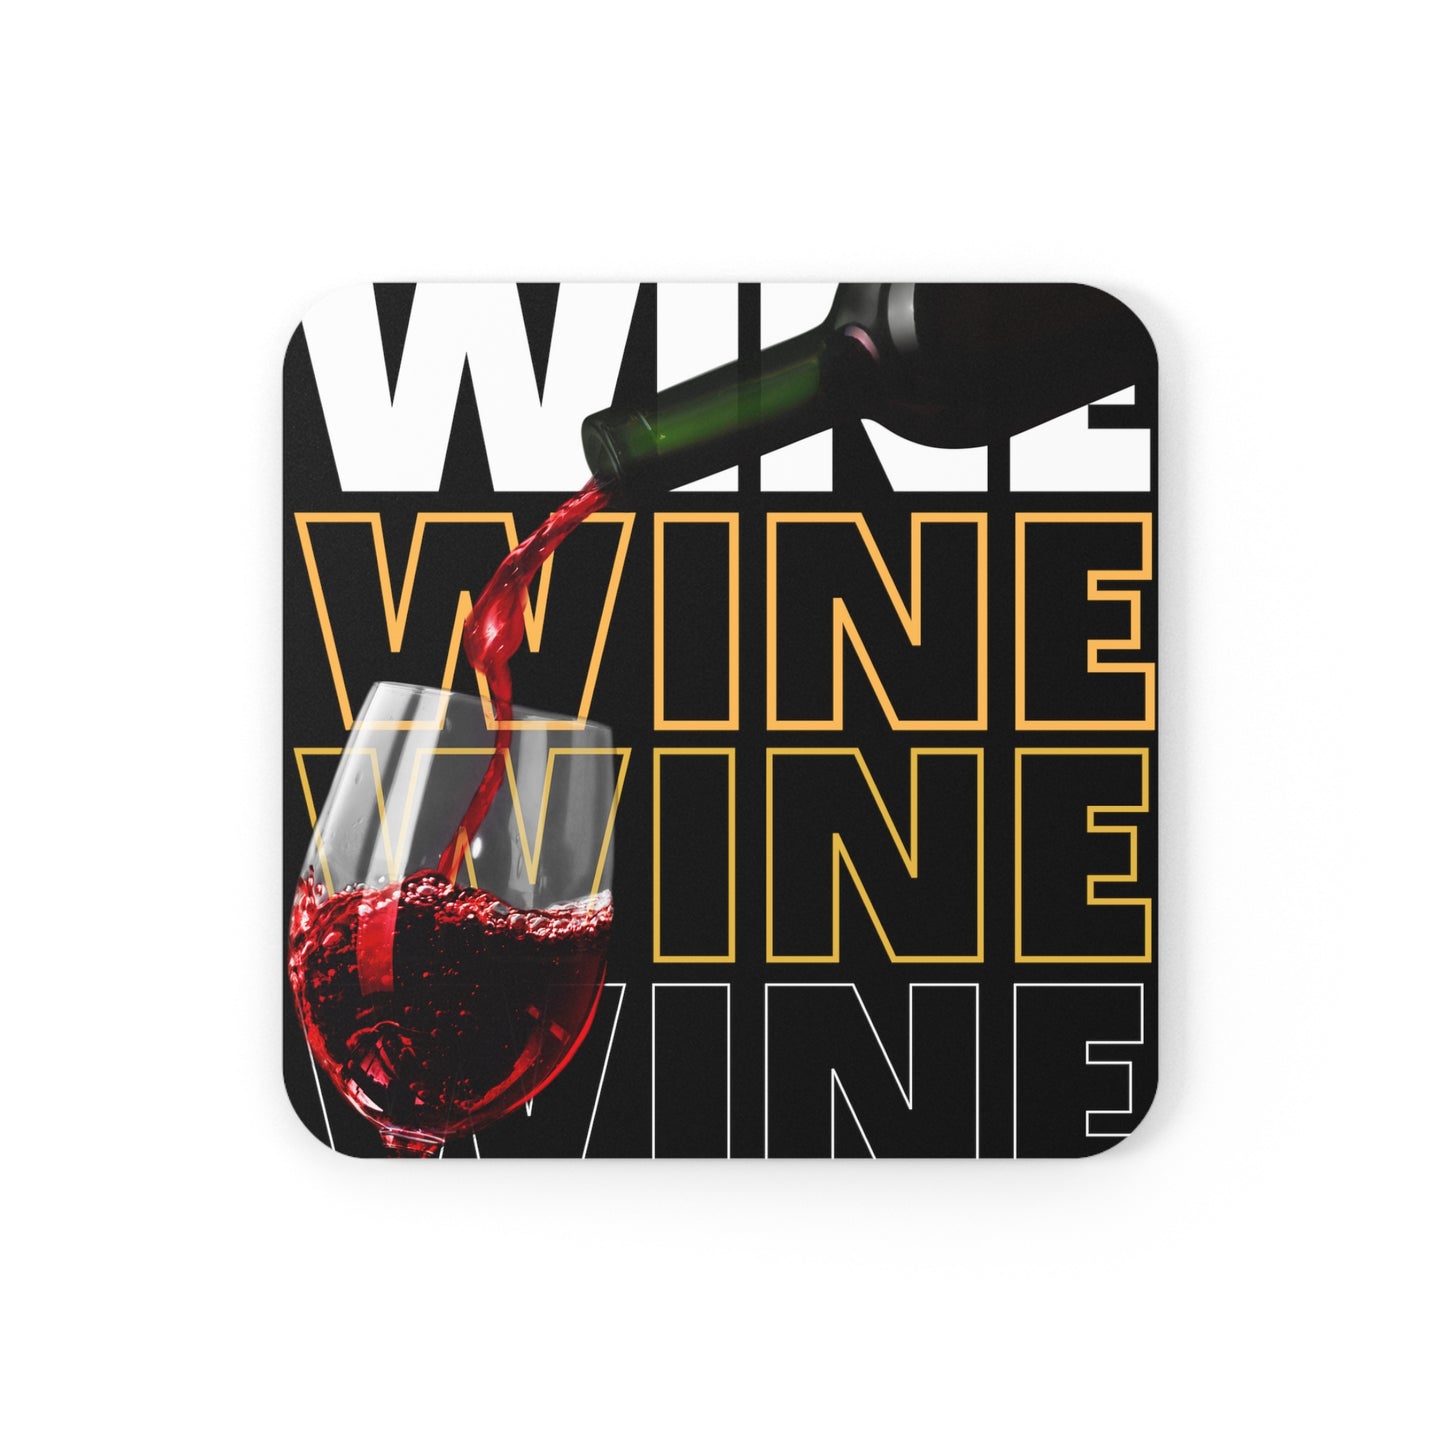 Wine, Wine, Wine Cork Back Coaster in 2 Classic Shapes! Share your love of wine with your friends and family